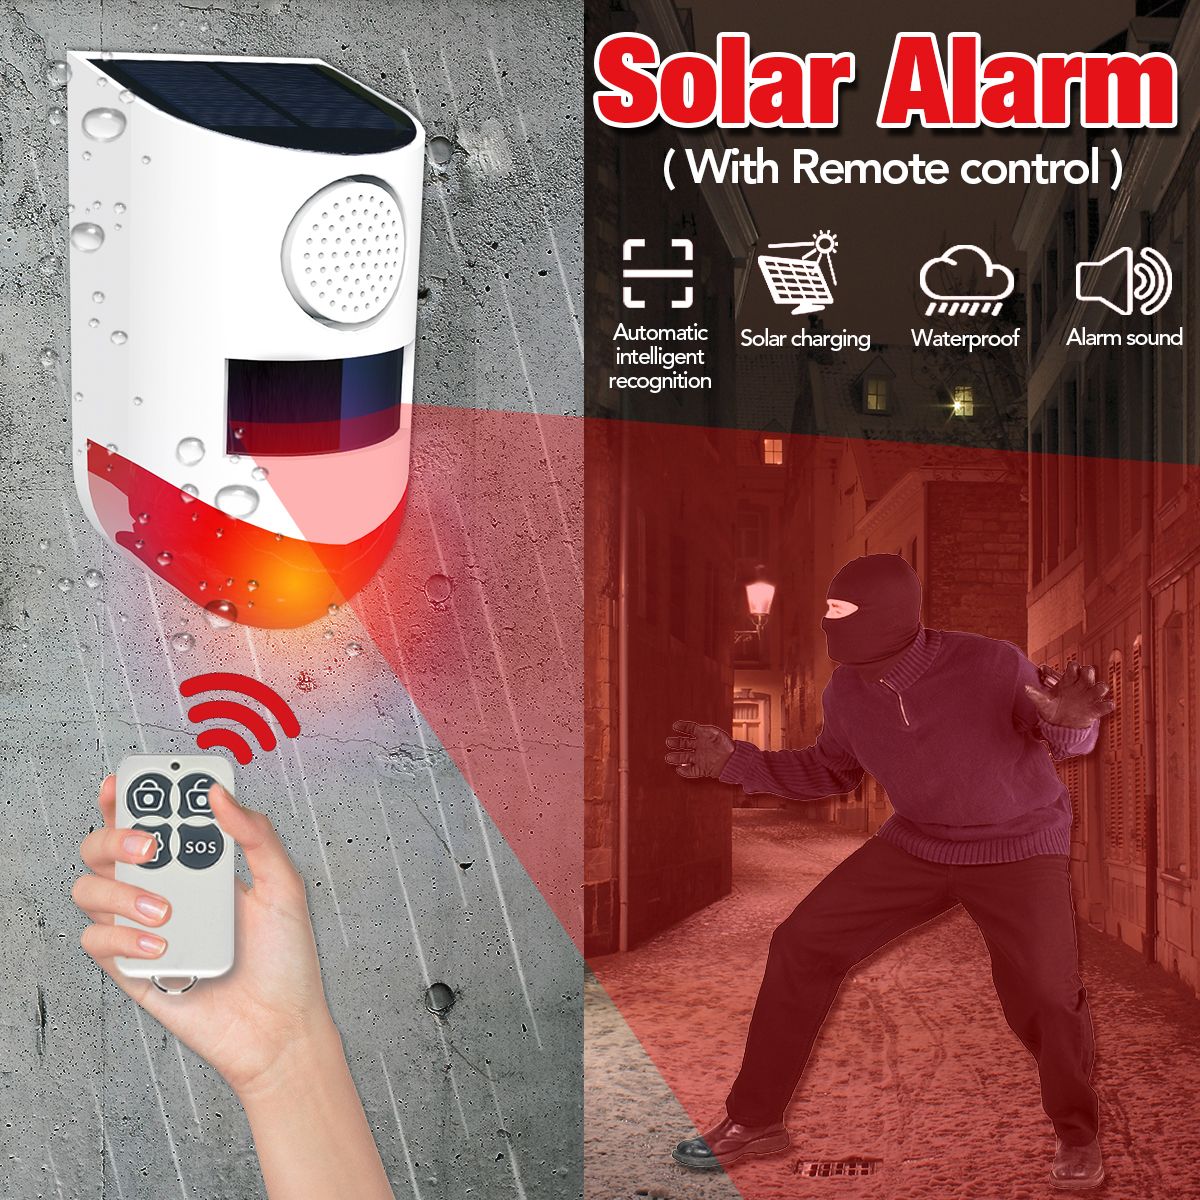 Waterproof-LED-Solar-Alarm-Light-Wireless-Flashing-Security-Wall-Lamp-for-Outdoor-Garden-with-Remote-1730831